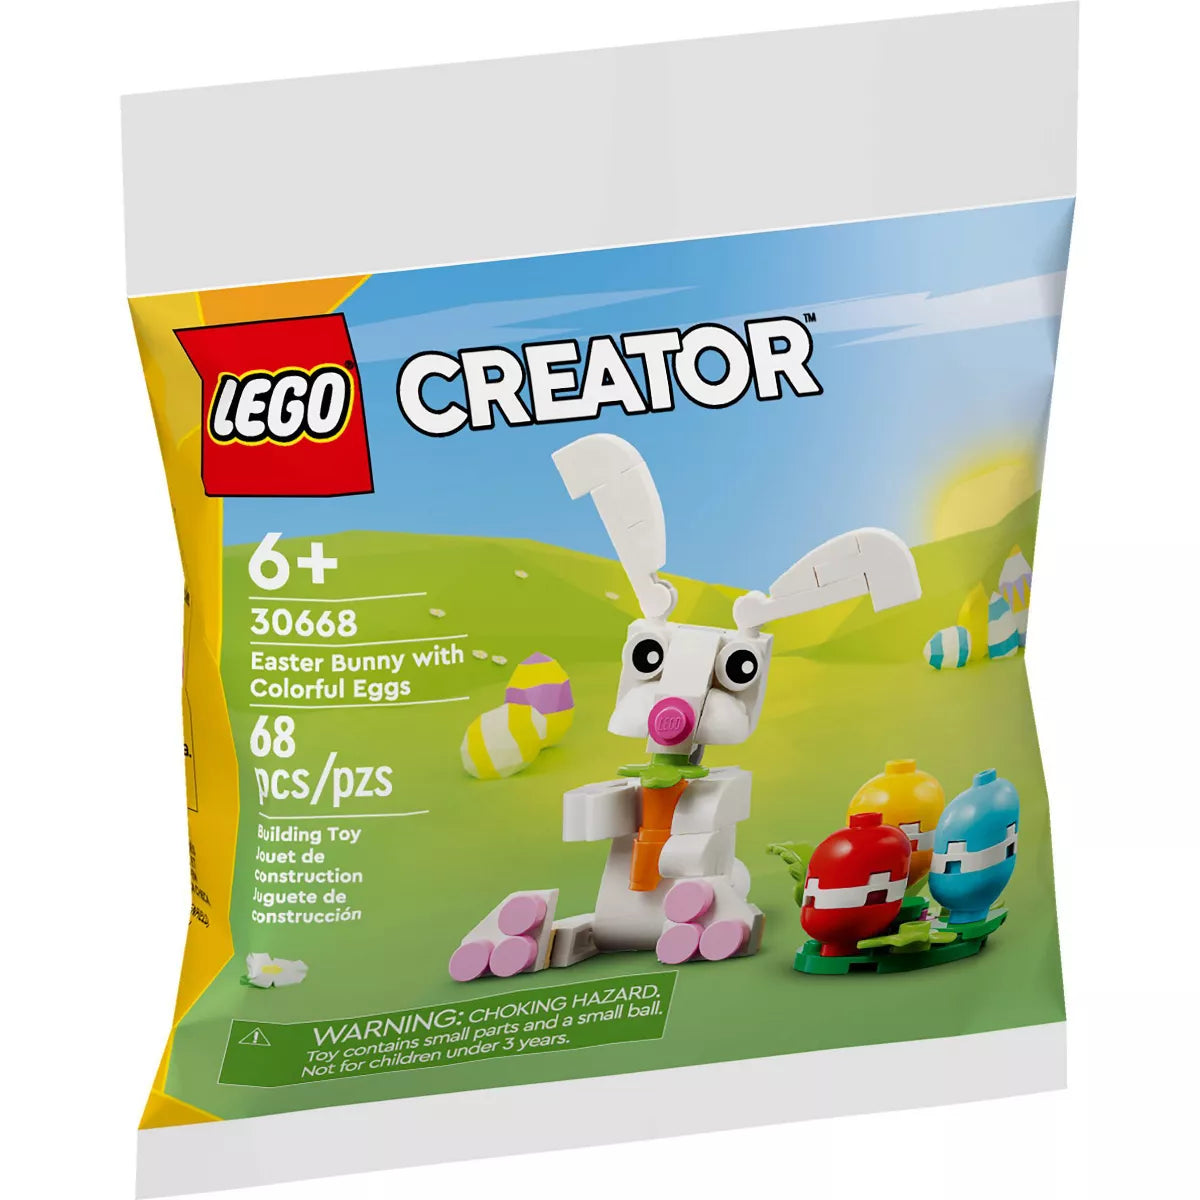 Easter Bunny with Colorful Eggs - LEGO Creator Polybag Set (30668)